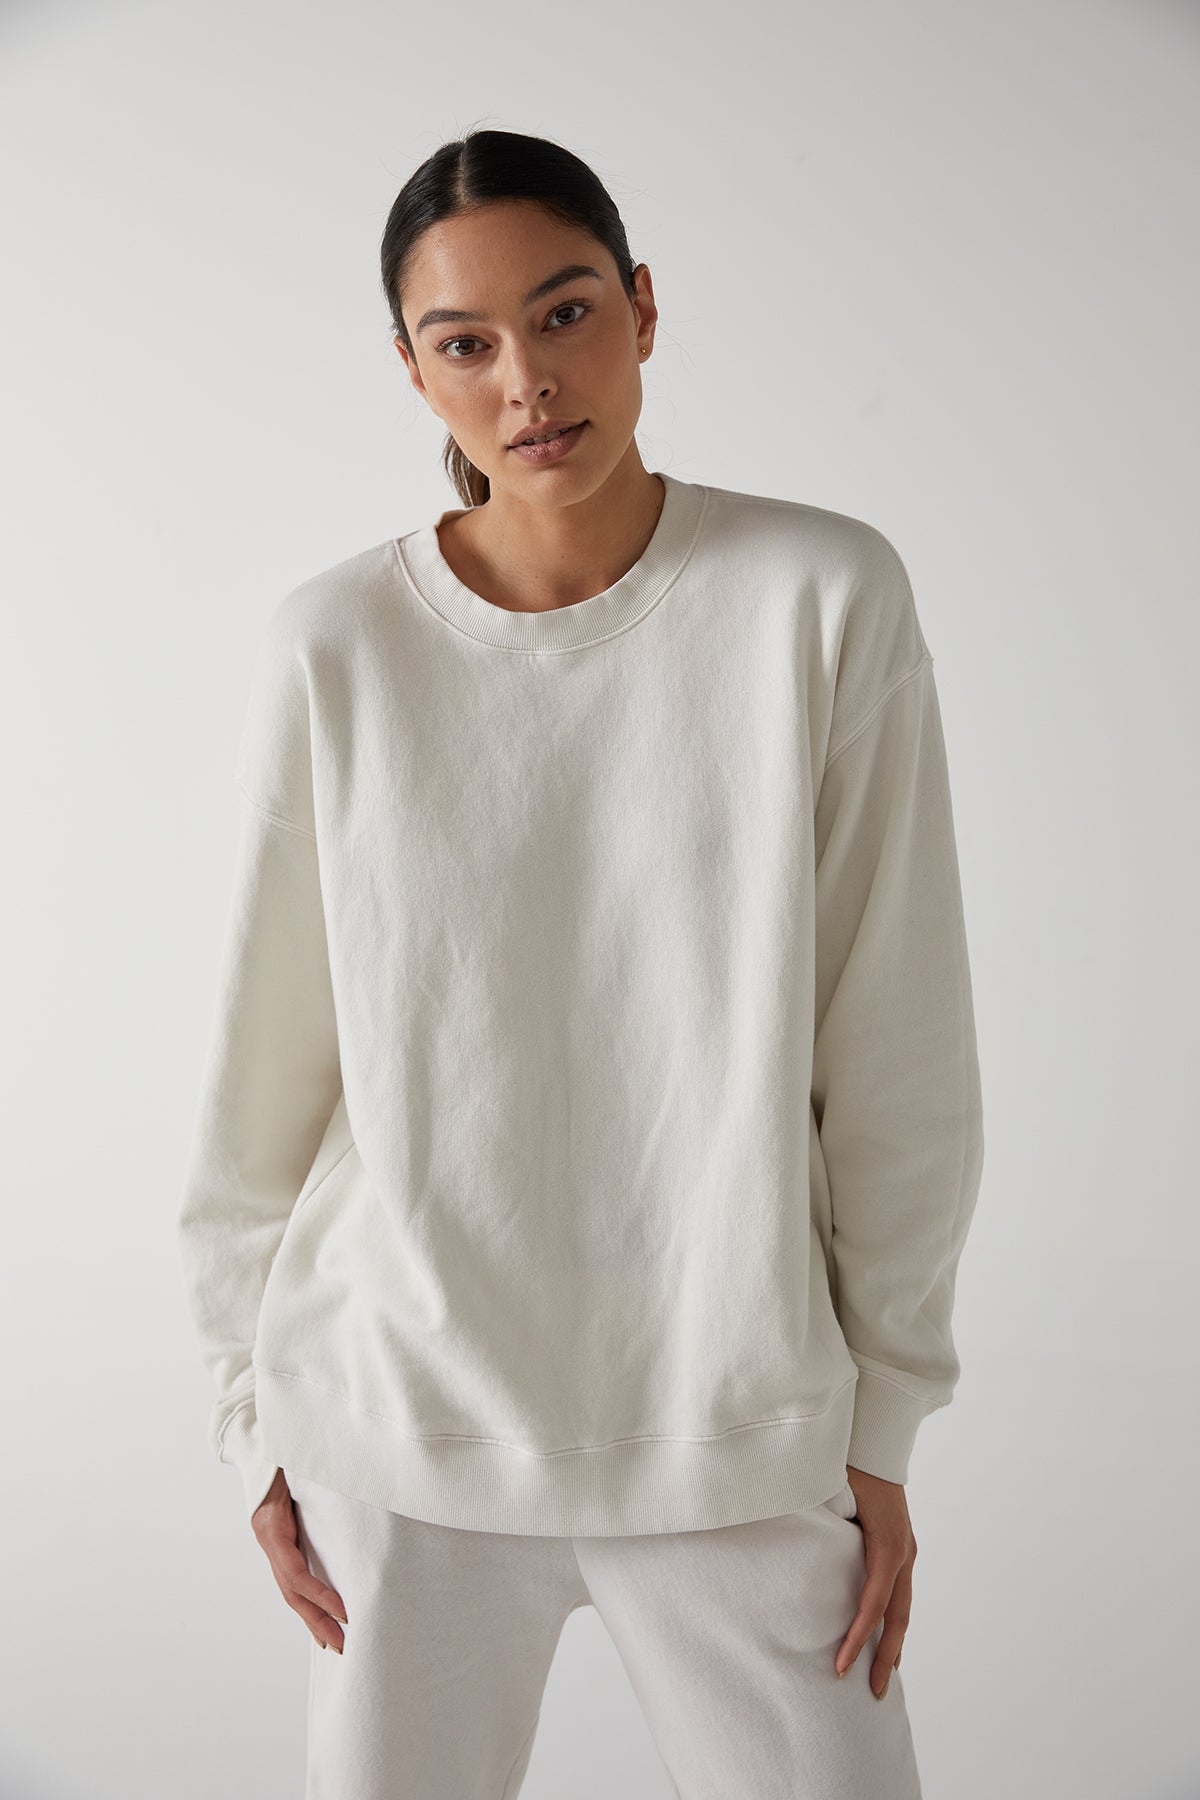   The model is wearing a slouchy white Abbot sweatshirt and sweatpants made from organic cotton by Velvet by Jenny Graham. 